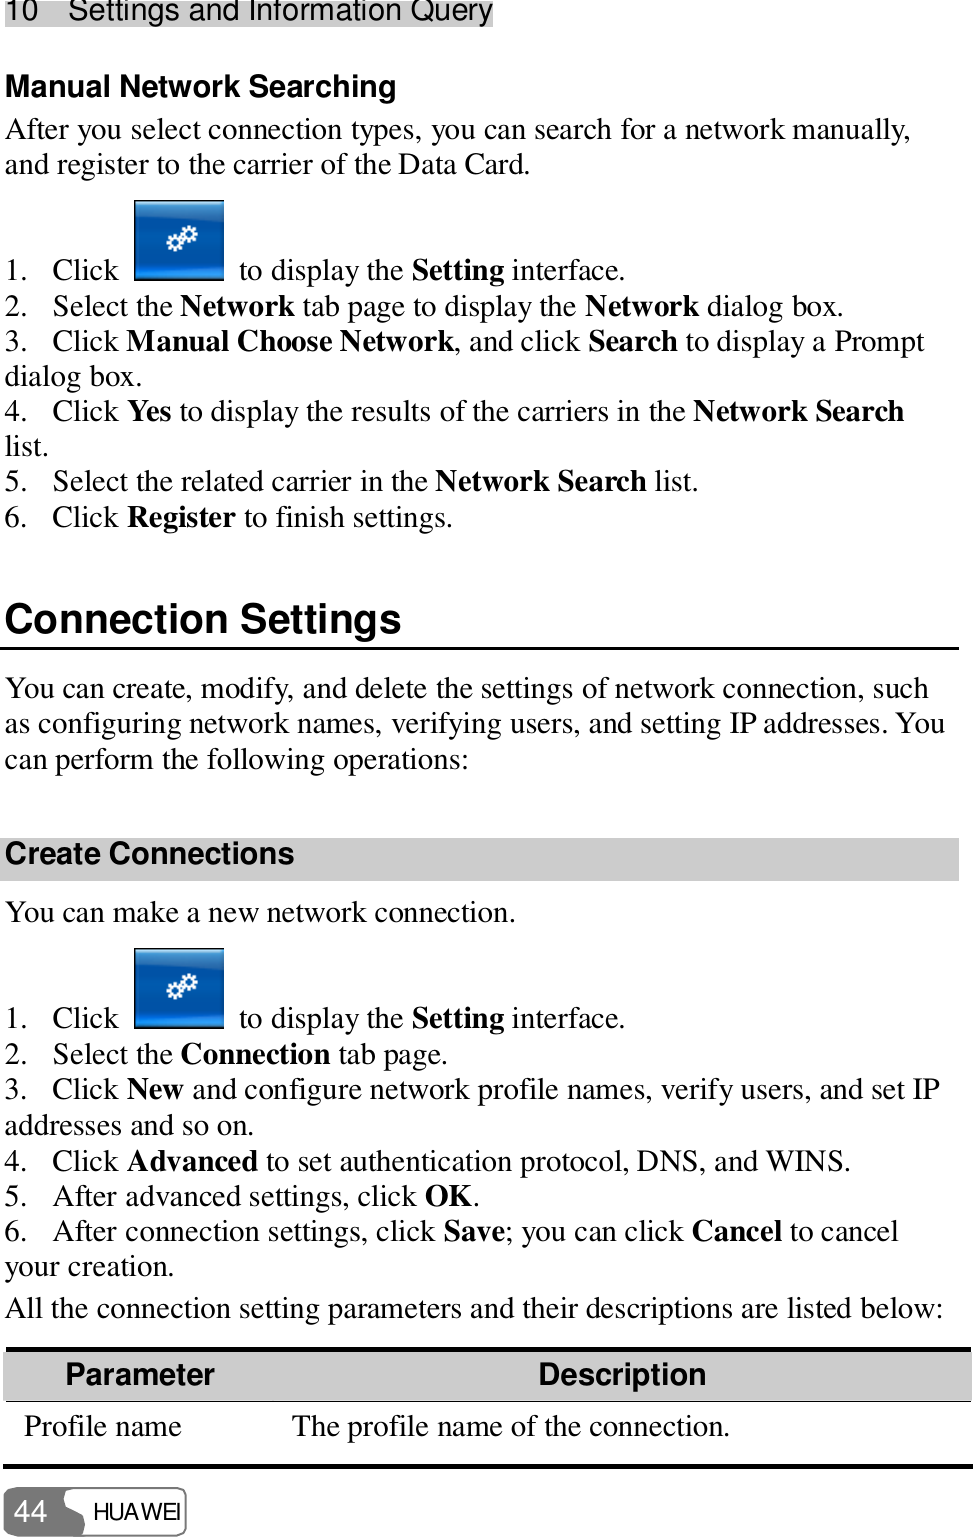 10  Settings and Information Query HUAWEI  44 Manual Network Searching After you select connection types, you can search for a network manually, and register to the carrier of the Data Card. 1. Click   to display the Setting interface. 2. Select the Network tab page to display the Network dialog box. 3. Click Manual Choose Network, and click Search to display a Prompt dialog box. 4. Click Yes to display the results of the carriers in the Network Search list. 5. Select the related carrier in the Network Search list. 6. Click Register to finish settings. Connection Settings You can create, modify, and delete the settings of network connection, such as configuring network names, verifying users, and setting IP addresses. You can perform the following operations: Create Connections You can make a new network connection. 1. Click   to display the Setting interface. 2. Select the Connection tab page. 3. Click New and configure network profile names, verify users, and set IP addresses and so on. 4. Click Advanced to set authentication protocol, DNS, and WINS. 5. After advanced settings, click OK. 6. After connection settings, click Save; you can click Cancel to cancel your creation. All the connection setting parameters and their descriptions are listed below: Parameter   Description Profile name  The profile name of the connection. 